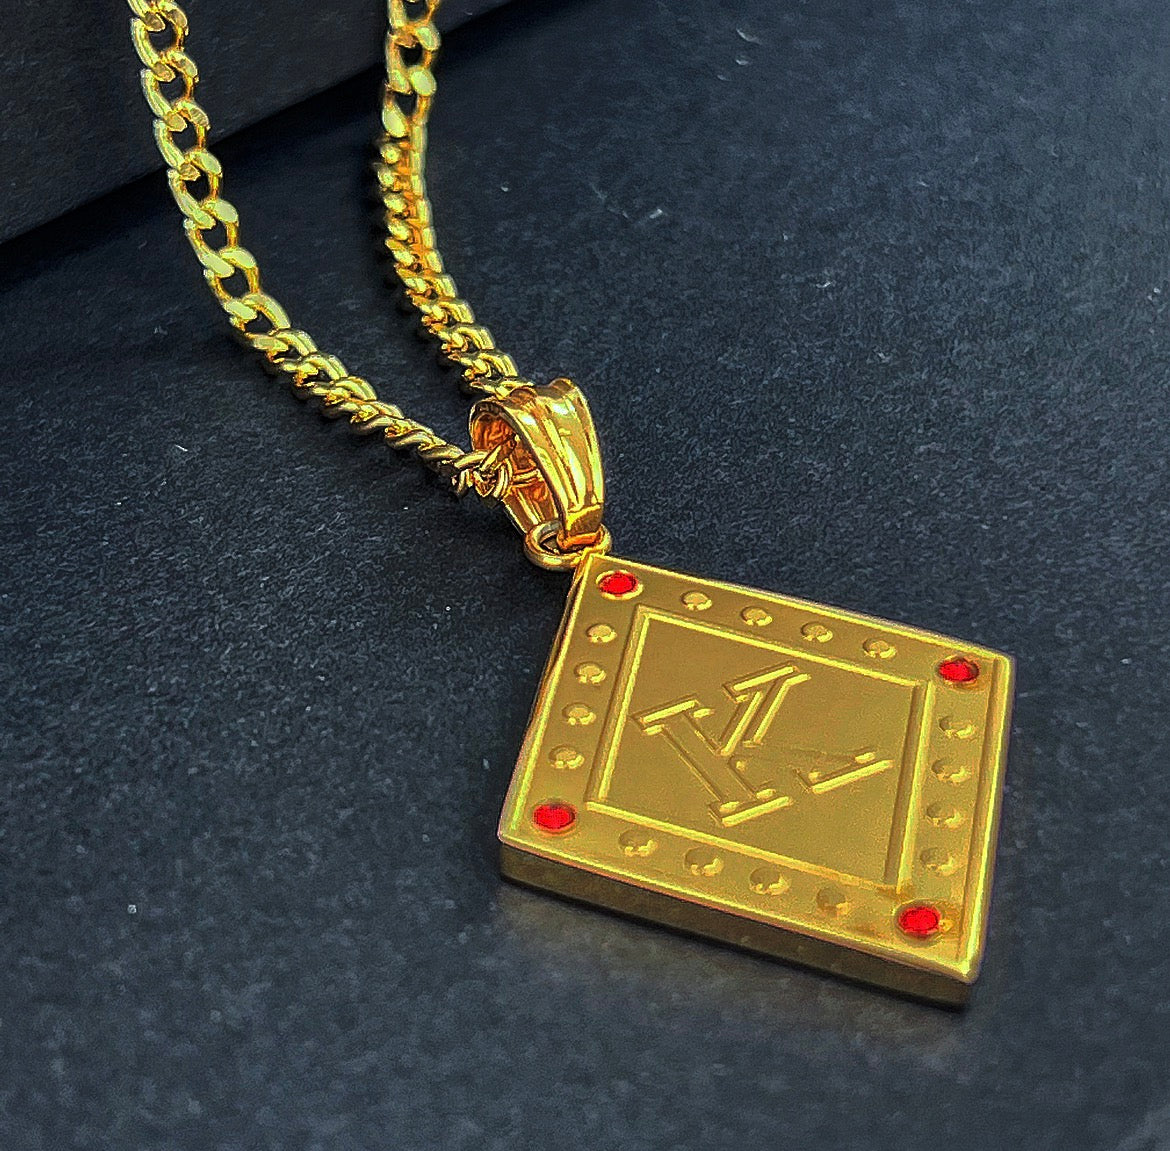 A beyond stunning Kappa Alpha Psi necklace and charm made with 24k solid gold Plated. This pendant is made to last for generations and generations, perfect for that special Kappa Alpha Psi member. The ultimate gift to show off your fraternity pride is here!  • Official Kappa Alpha Psi Licensed Product: passed through examination and requirements by the Fraternity as a whole.